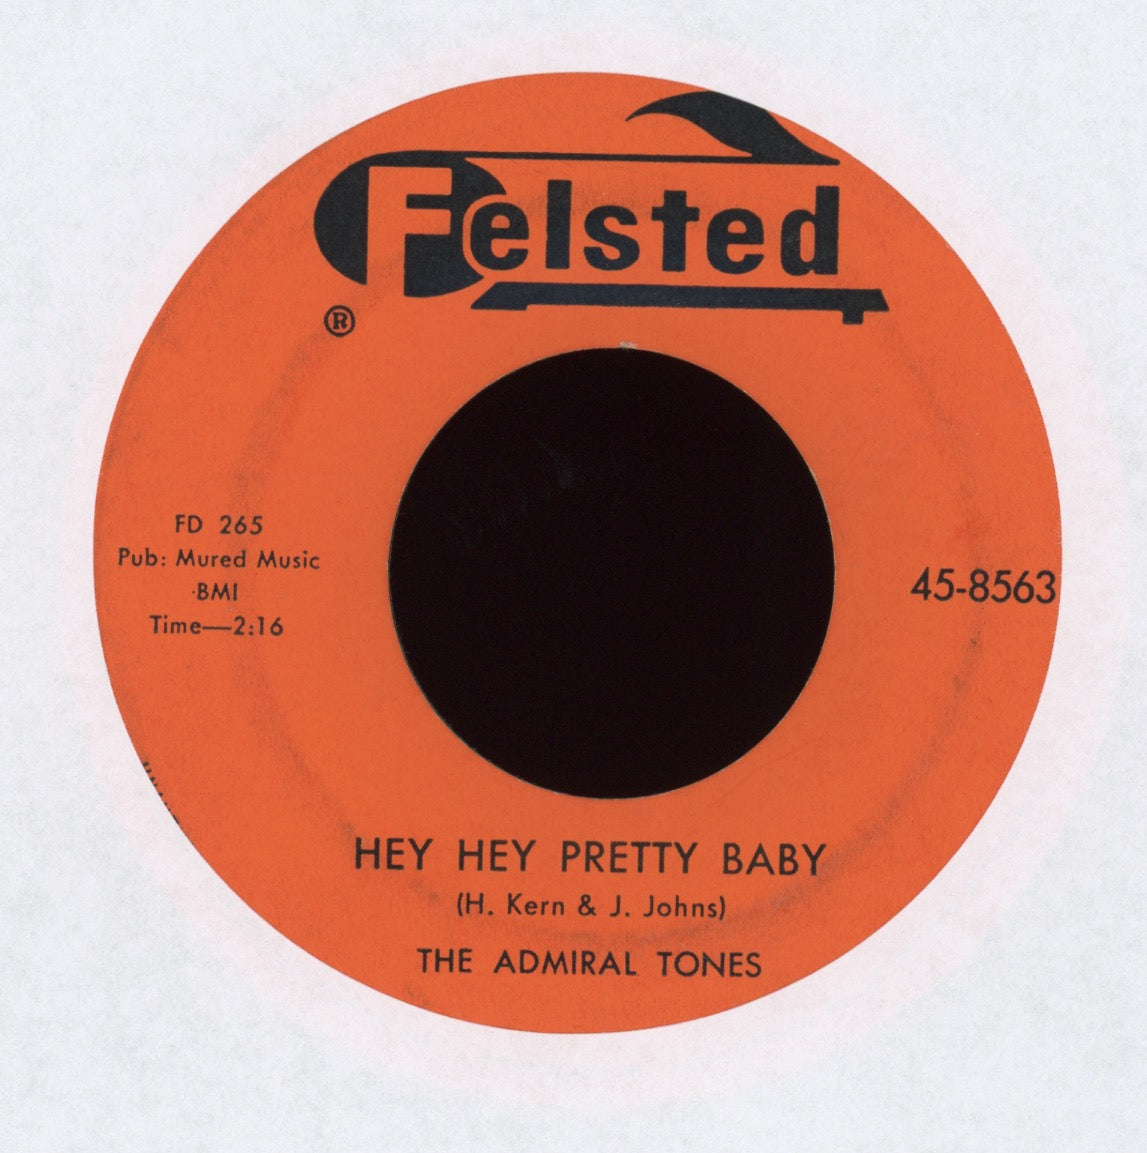 The Admiral Tones - Rocksville, PA. / Hey Hey Pretty Baby on Felsted